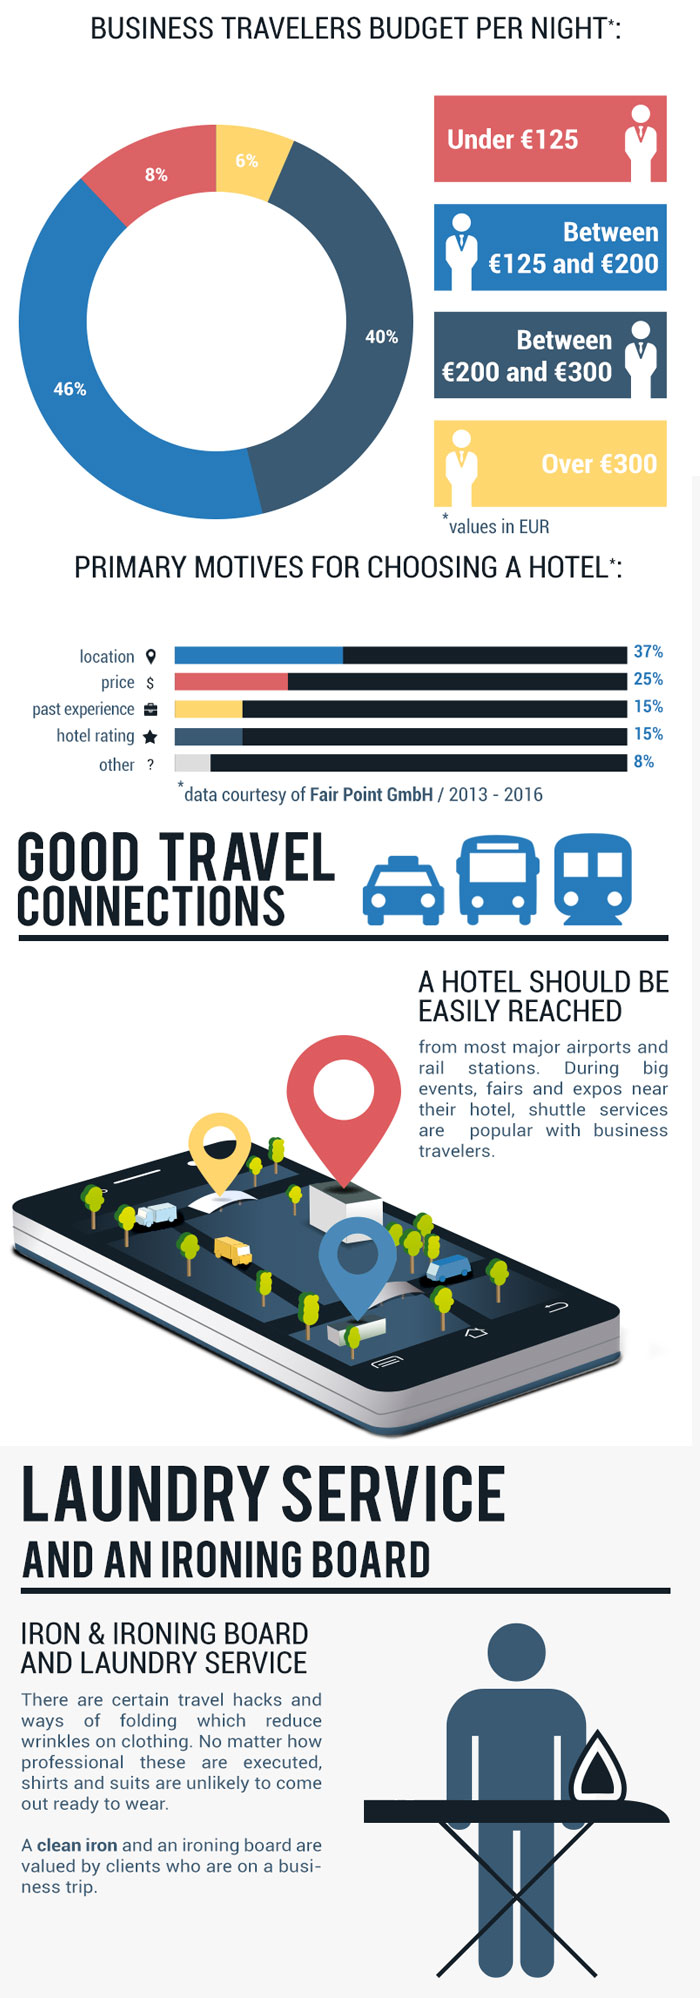 What Do Business Travelers Value The Most In A Hotel?